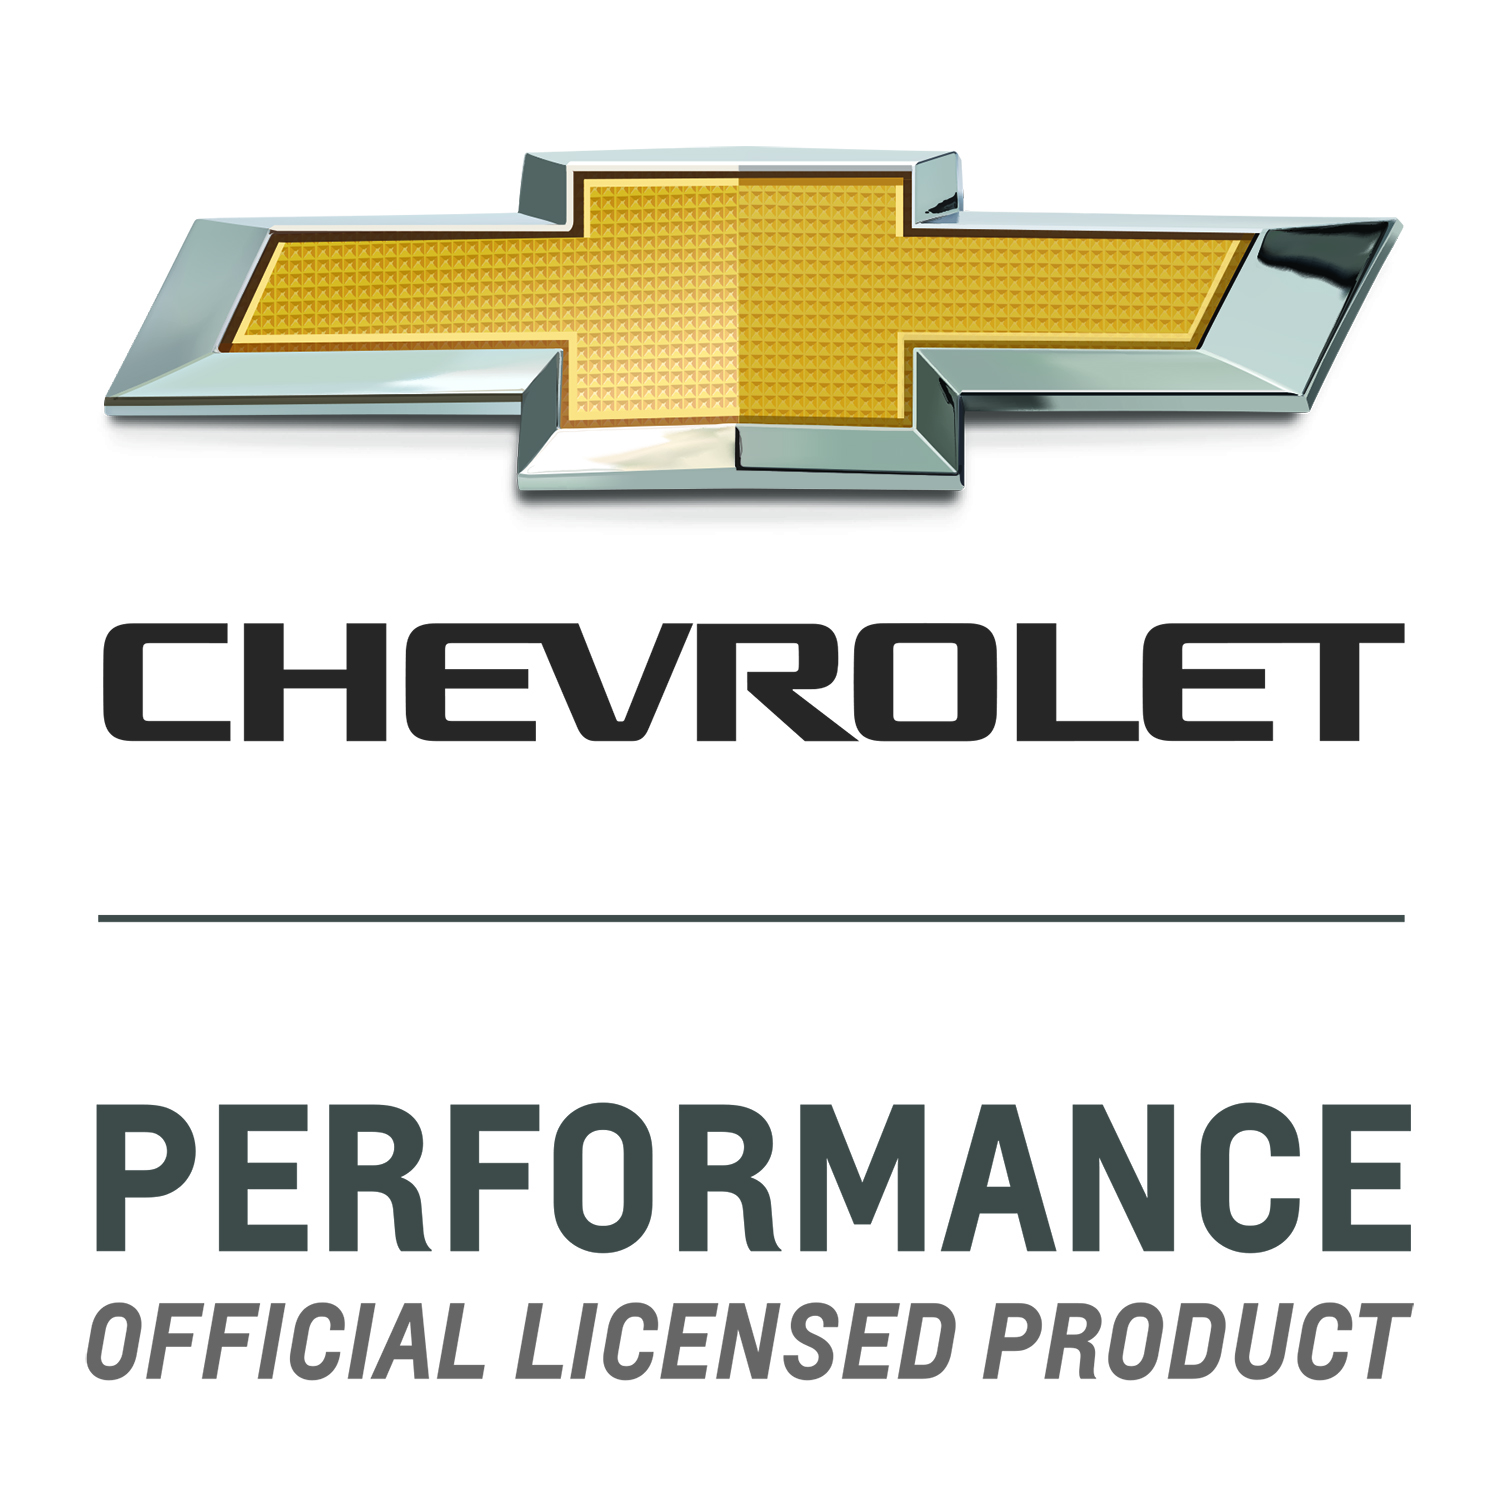 General Motors Official Licensed Product Statement